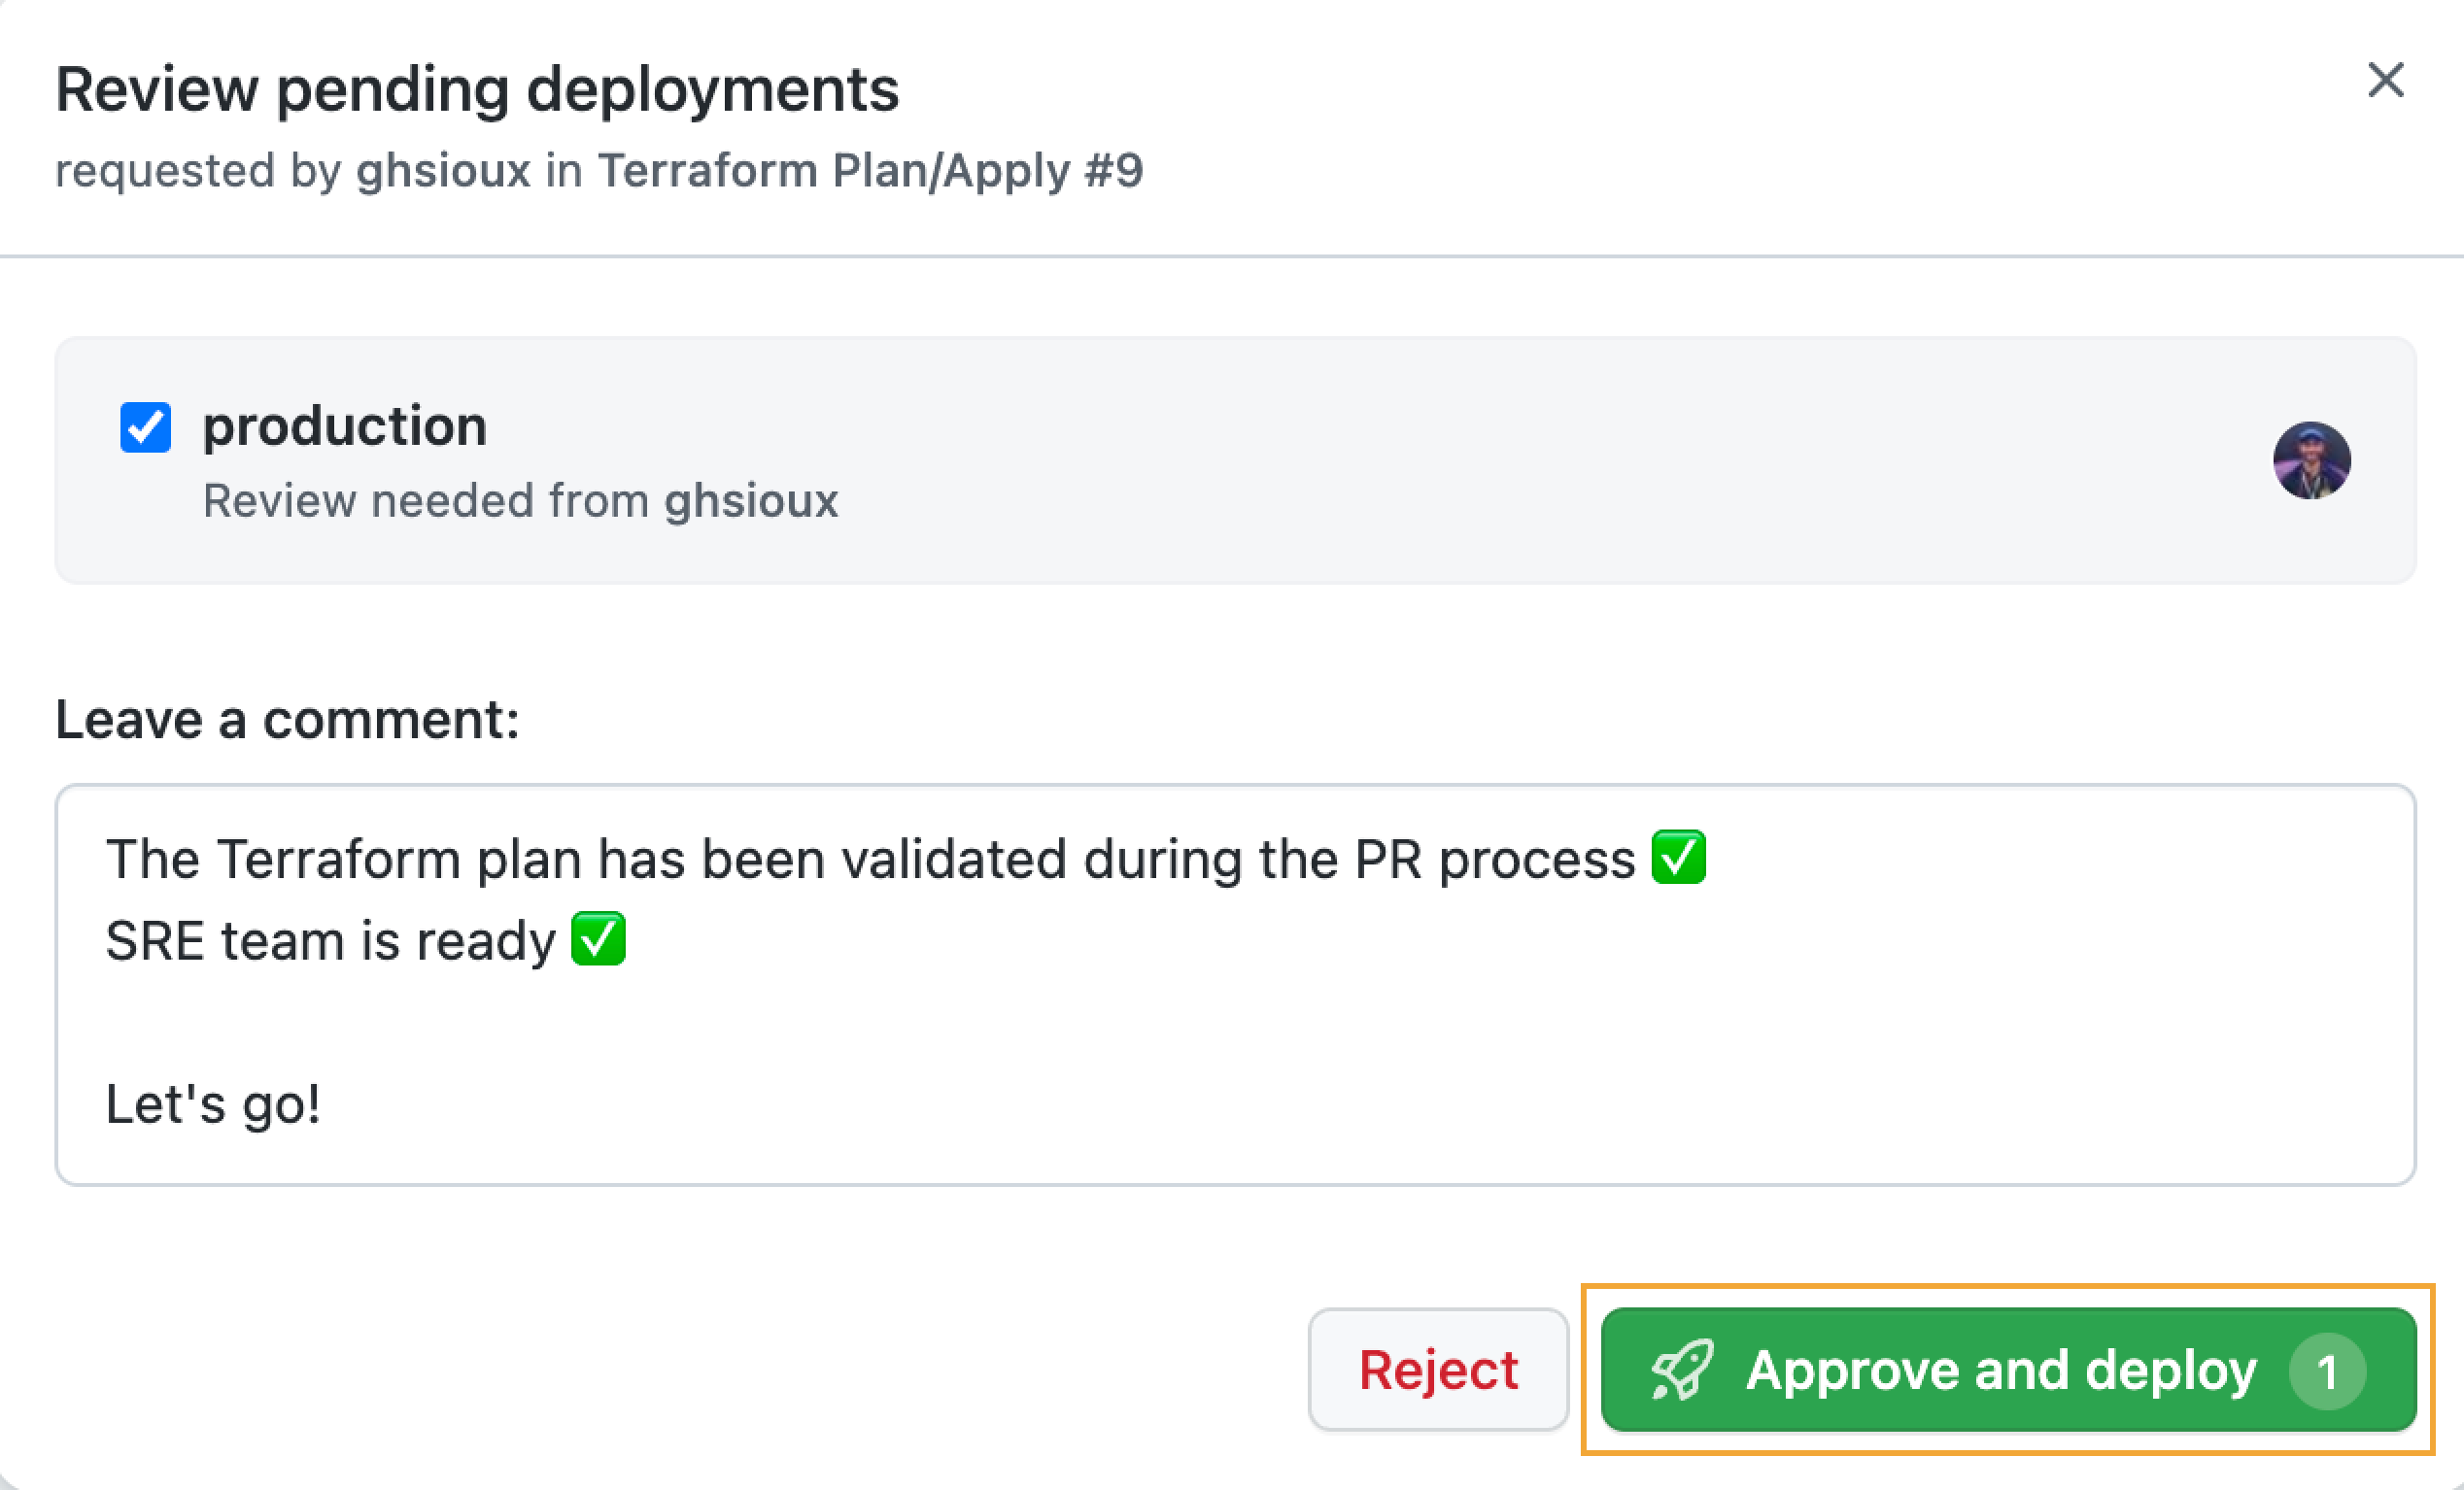 deploymend review done